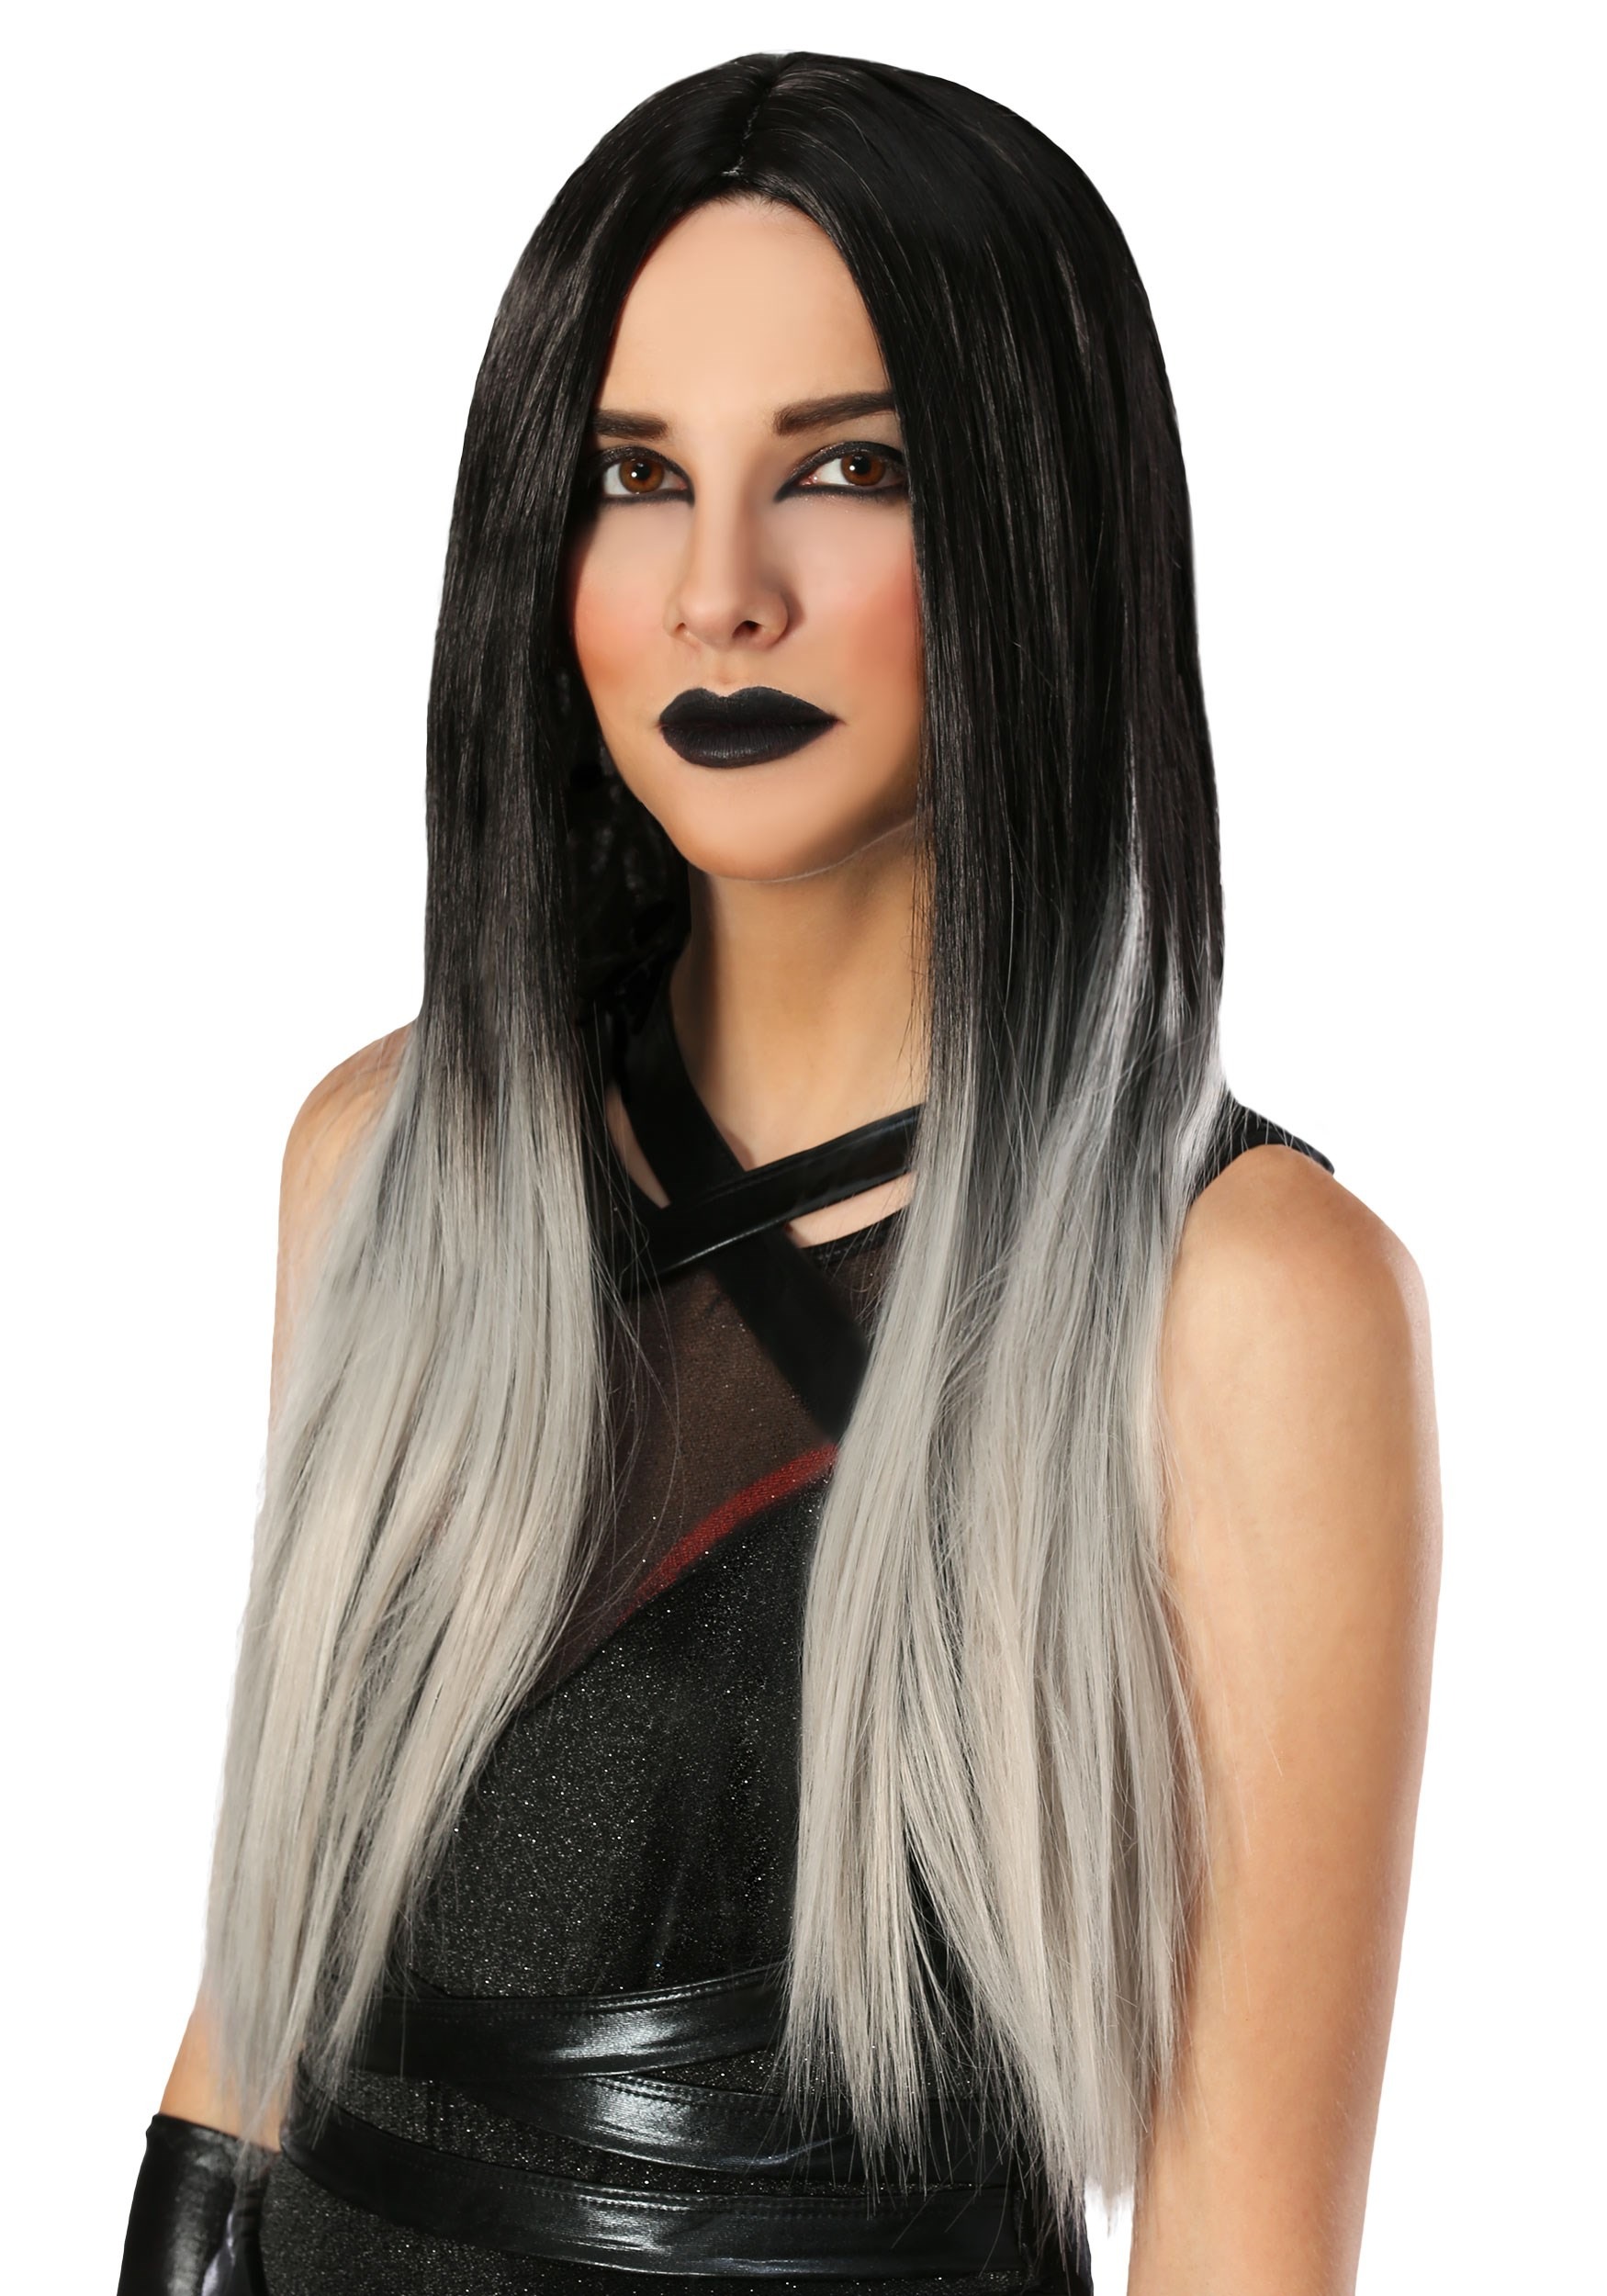 https://images.halloweencostumes.ca/products/42279/1-1/womens-black-and-grey-ombre-wig.jpg